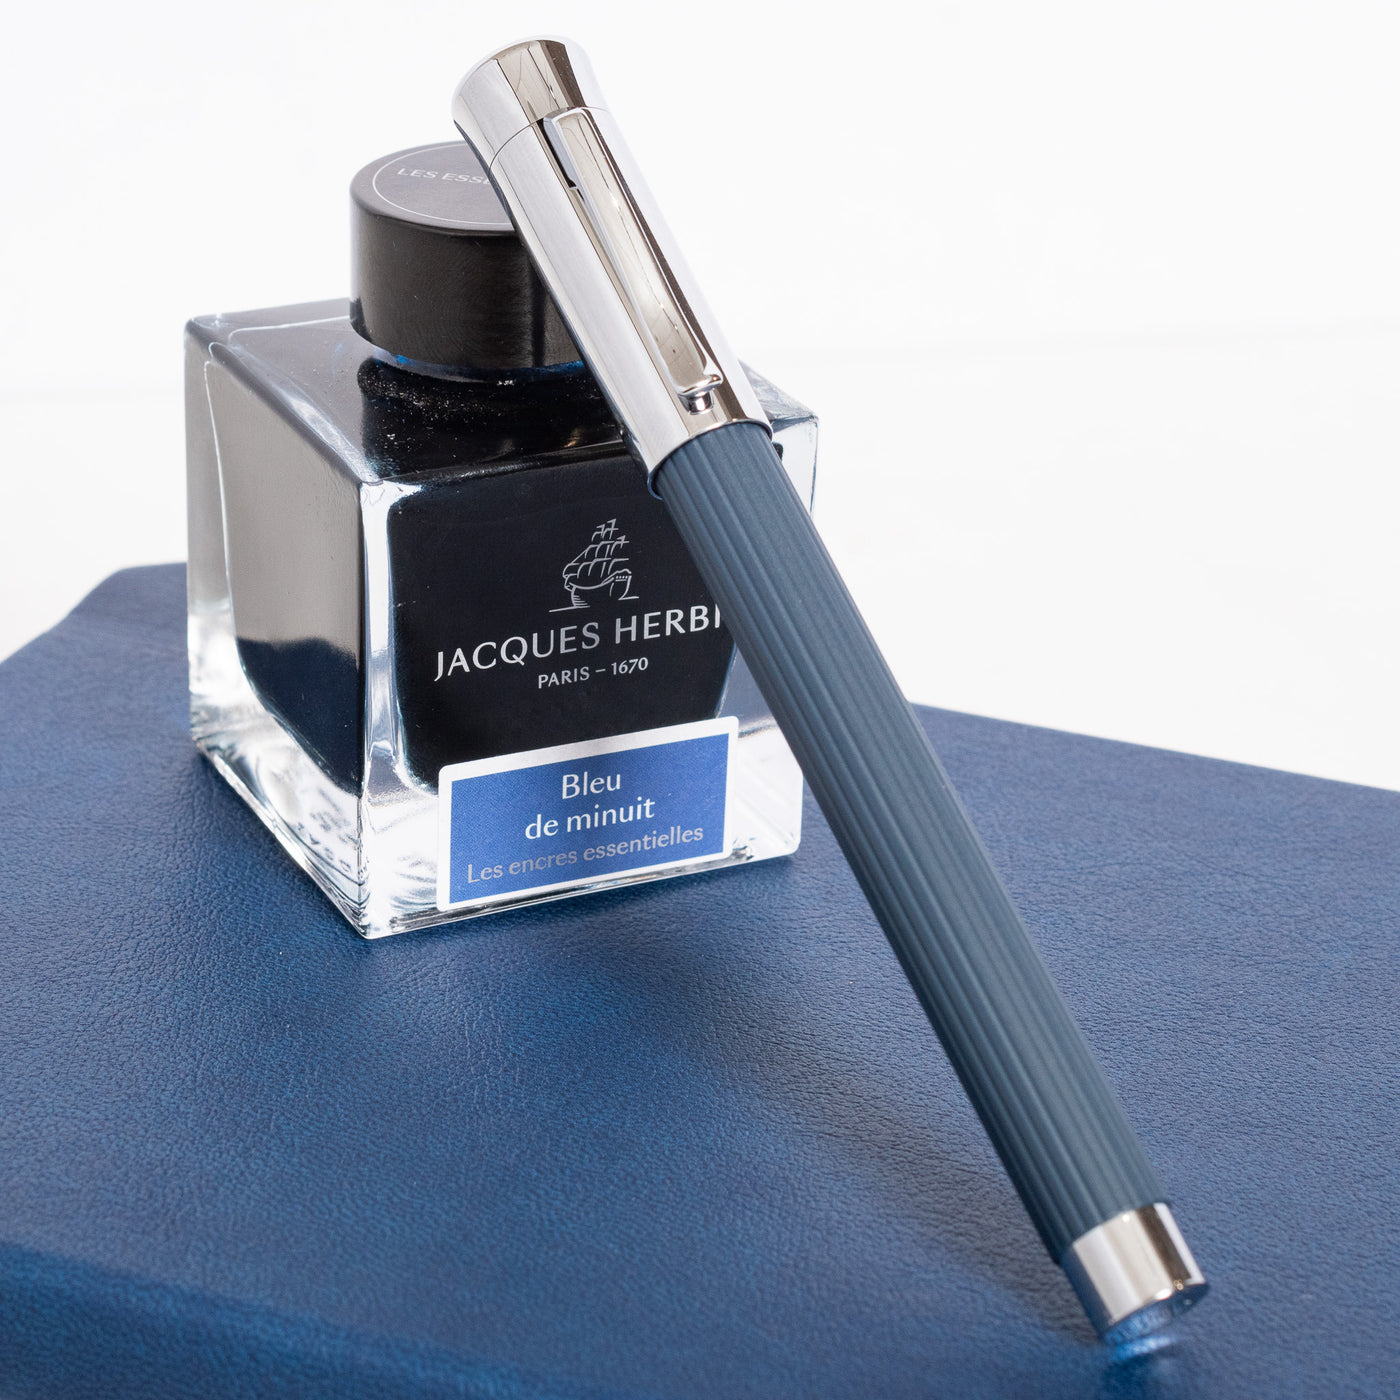 Faber-Castell Tamitio Midnight Blue Fountain Pen capped